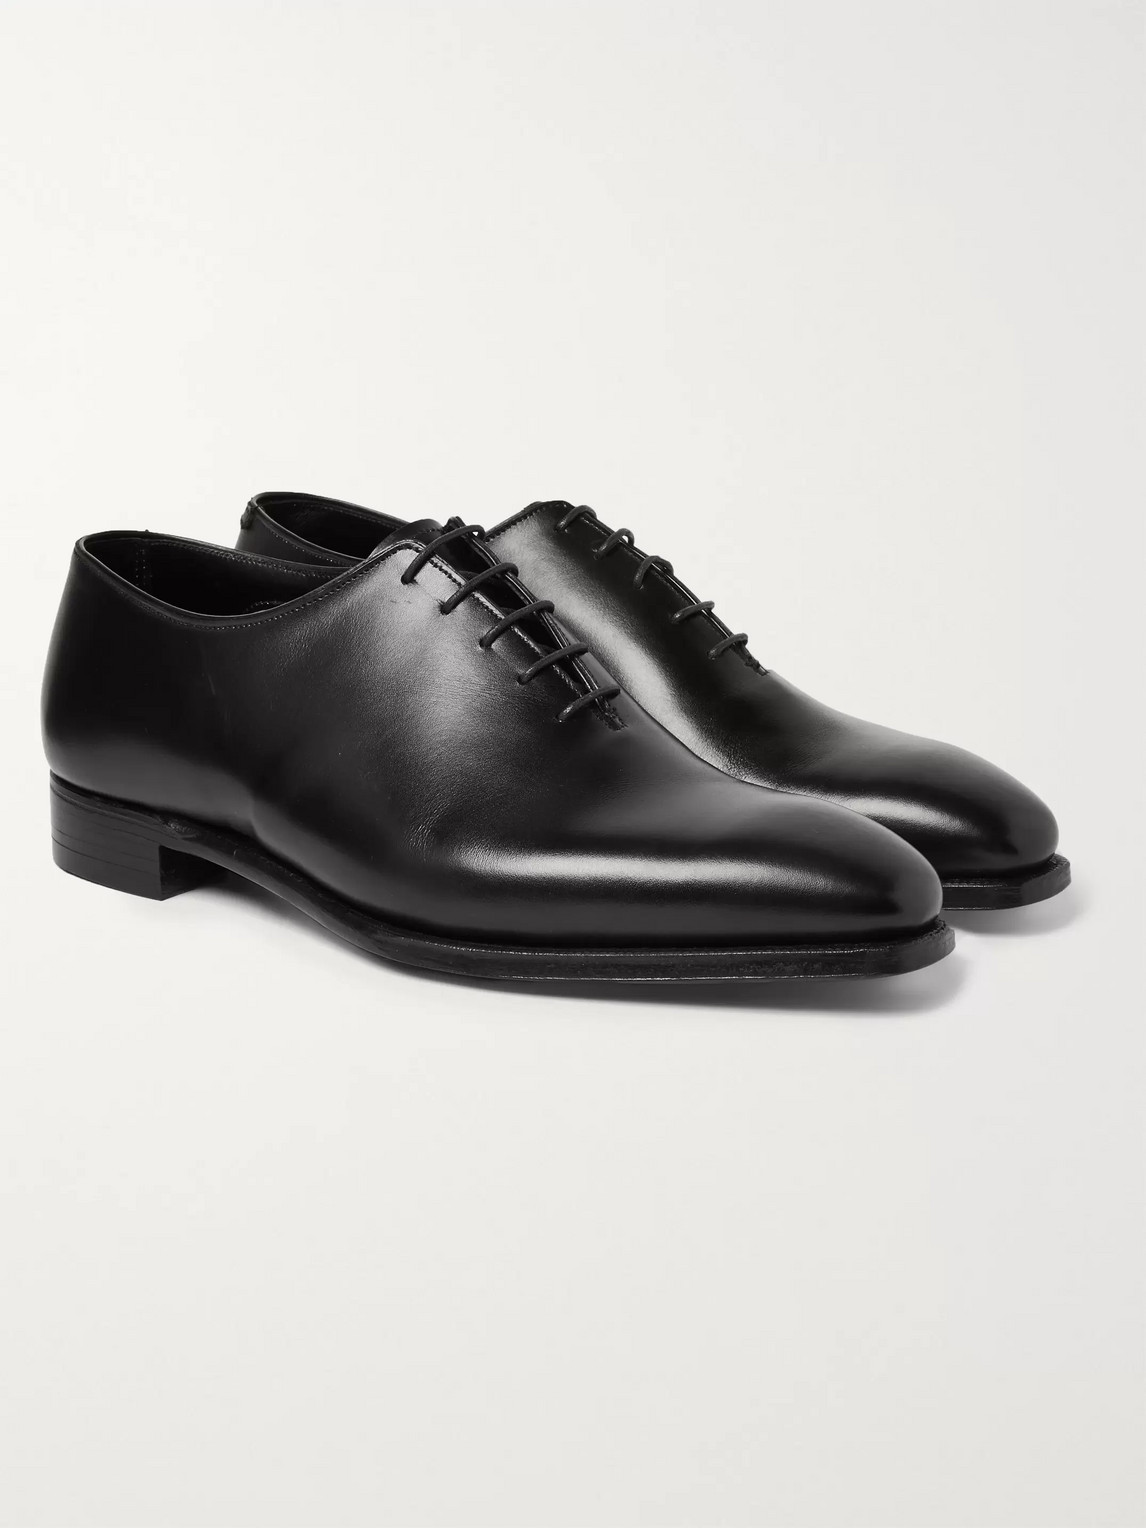 George Cleverley Alan 3 Whole-cut Leather Oxford Shoes In Black